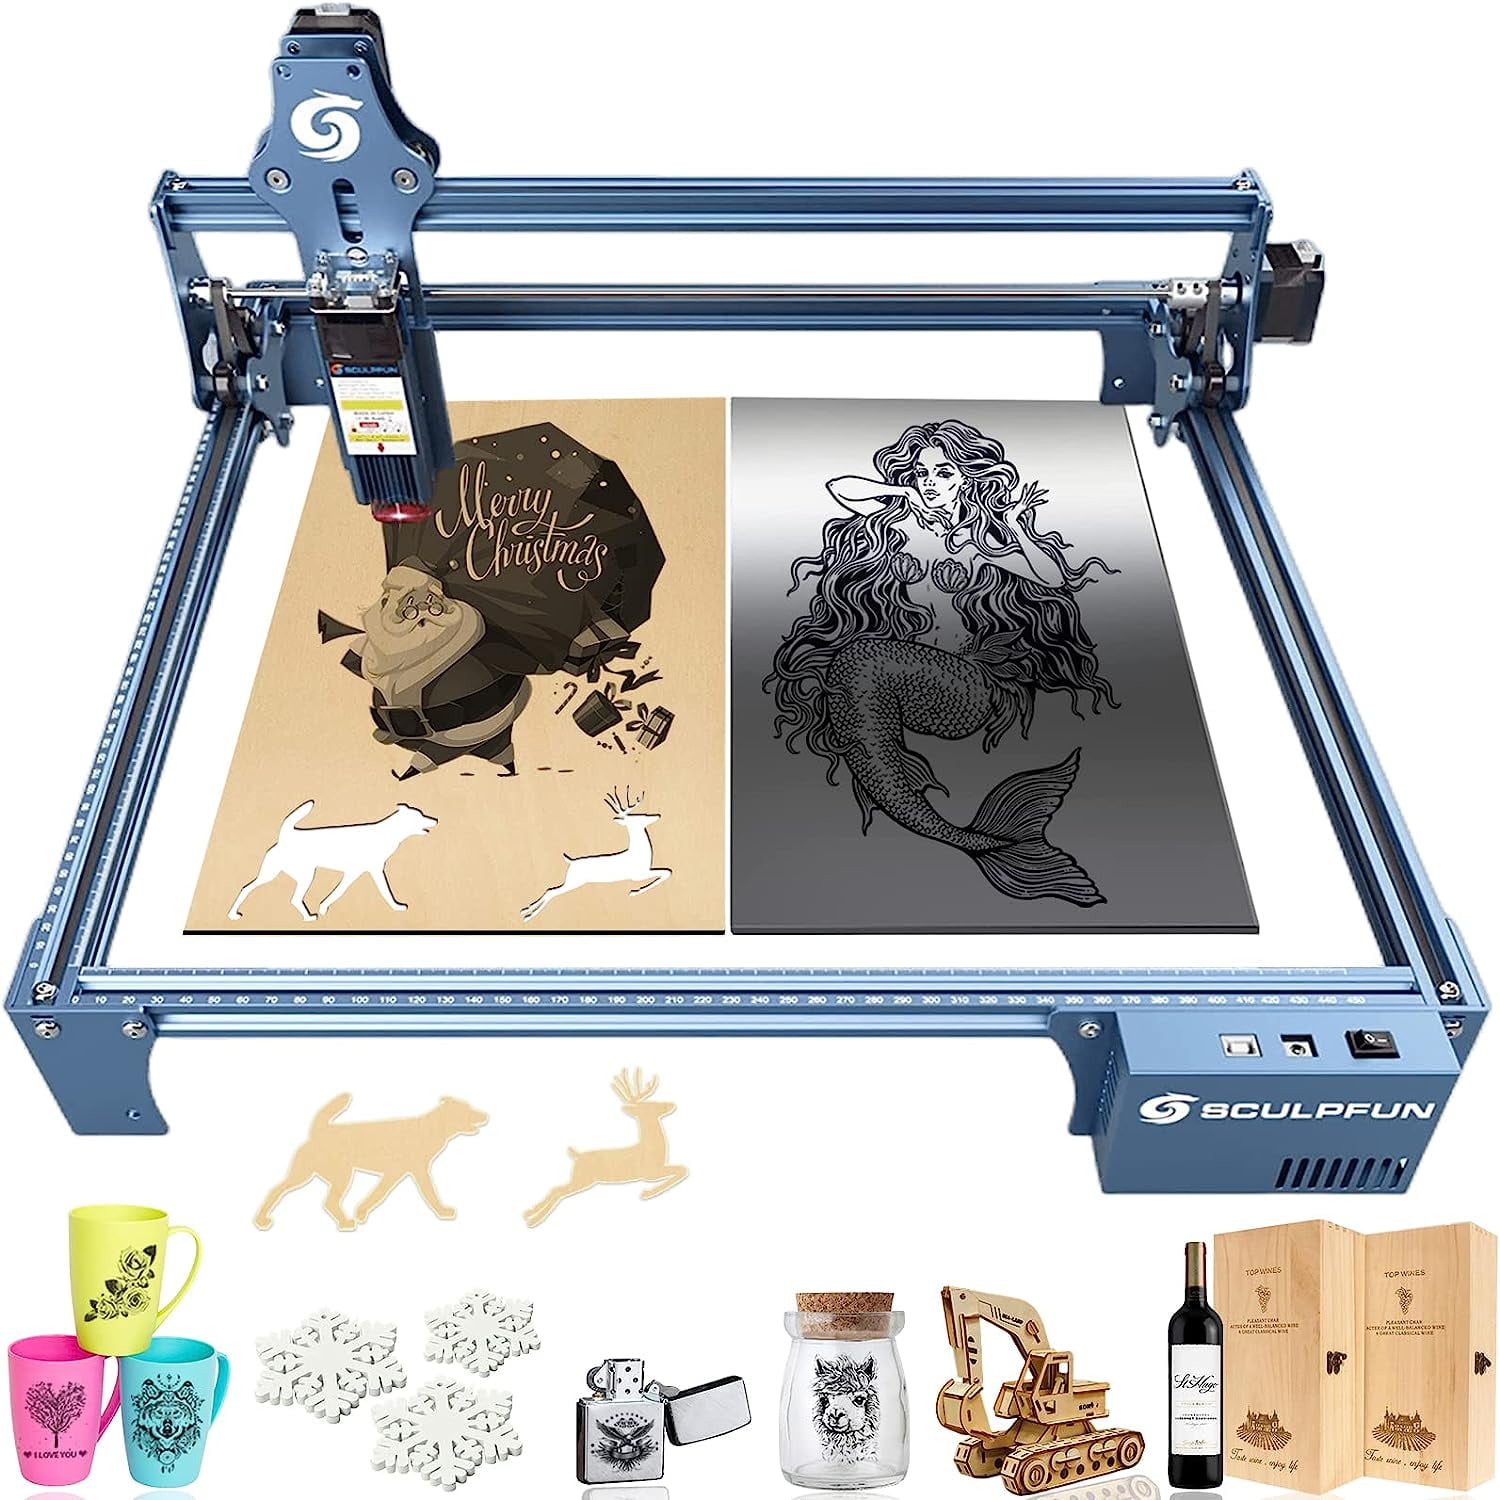 Sculpfun S9 Laser Engraving Machine Provides Incredible Results at